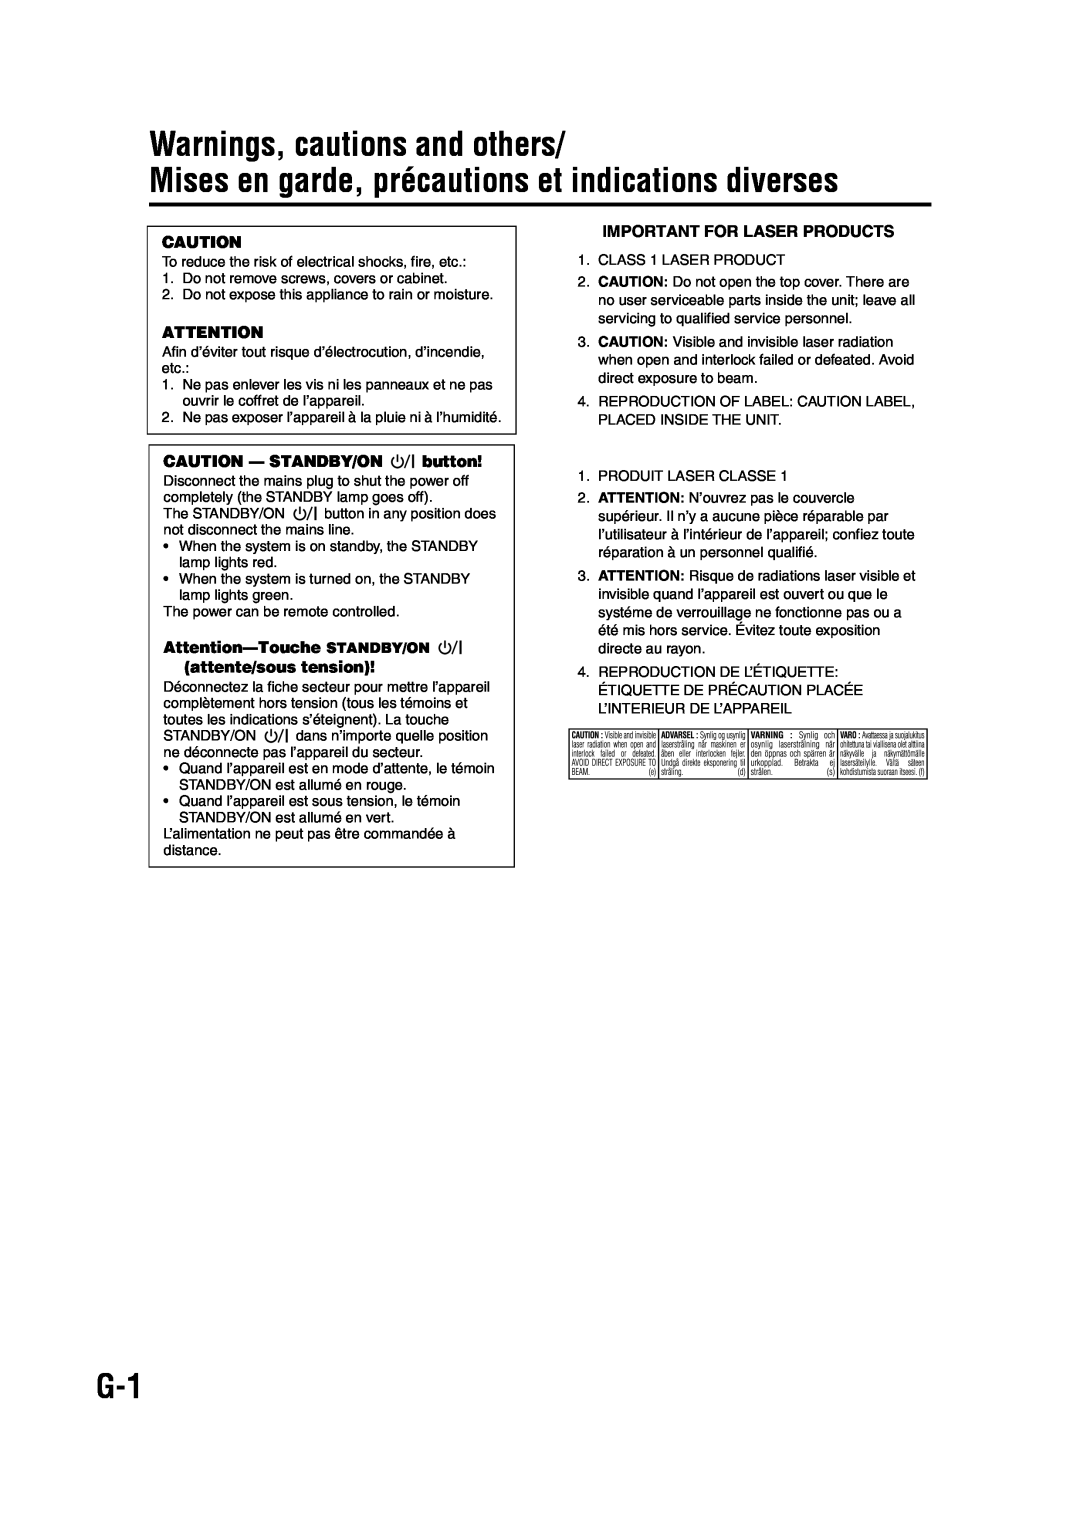 JVC GVT0142-001A manual Attention––Touche STANDBY/ON attente/sous tension, Warnings, cautions and others 